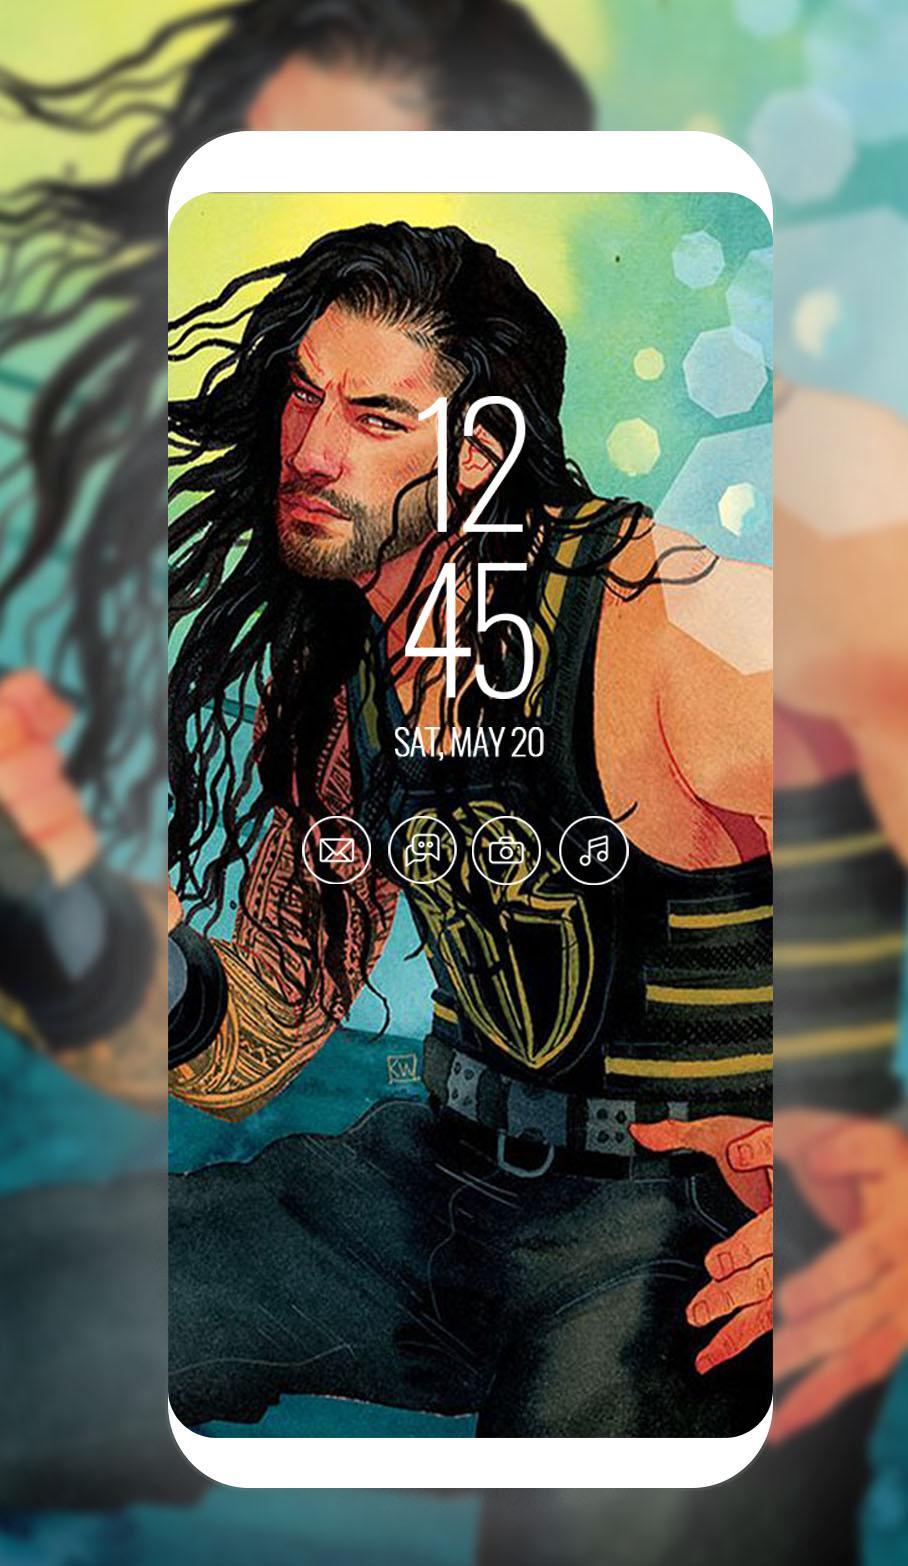 Roman Reigns Wallpaper Hd 18 For Android Apk Download